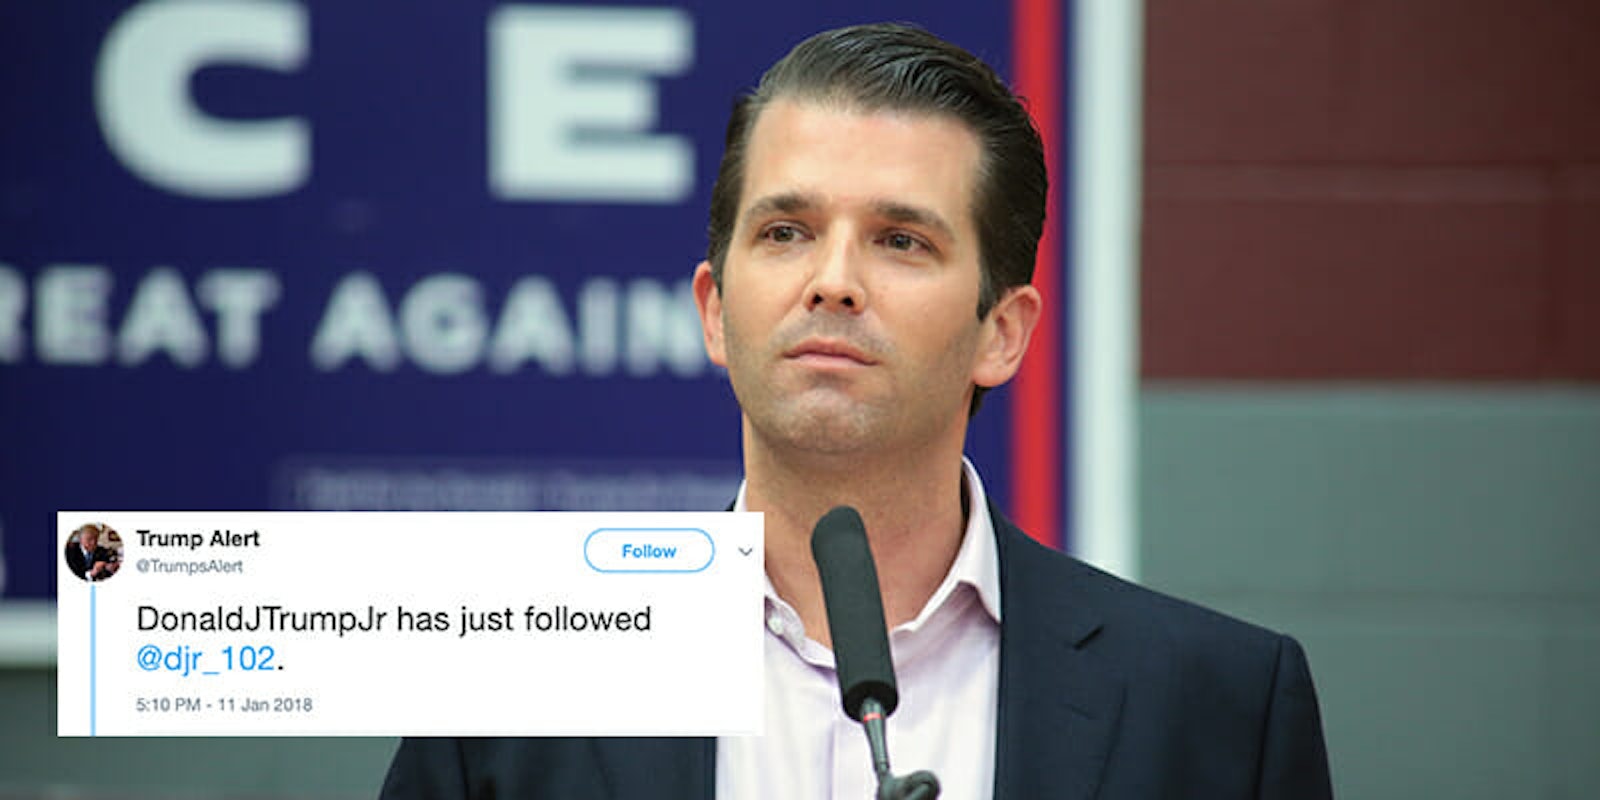 Donald Trump Jr. came under fire Thursday for seemingly having followed a porn Twitter account.